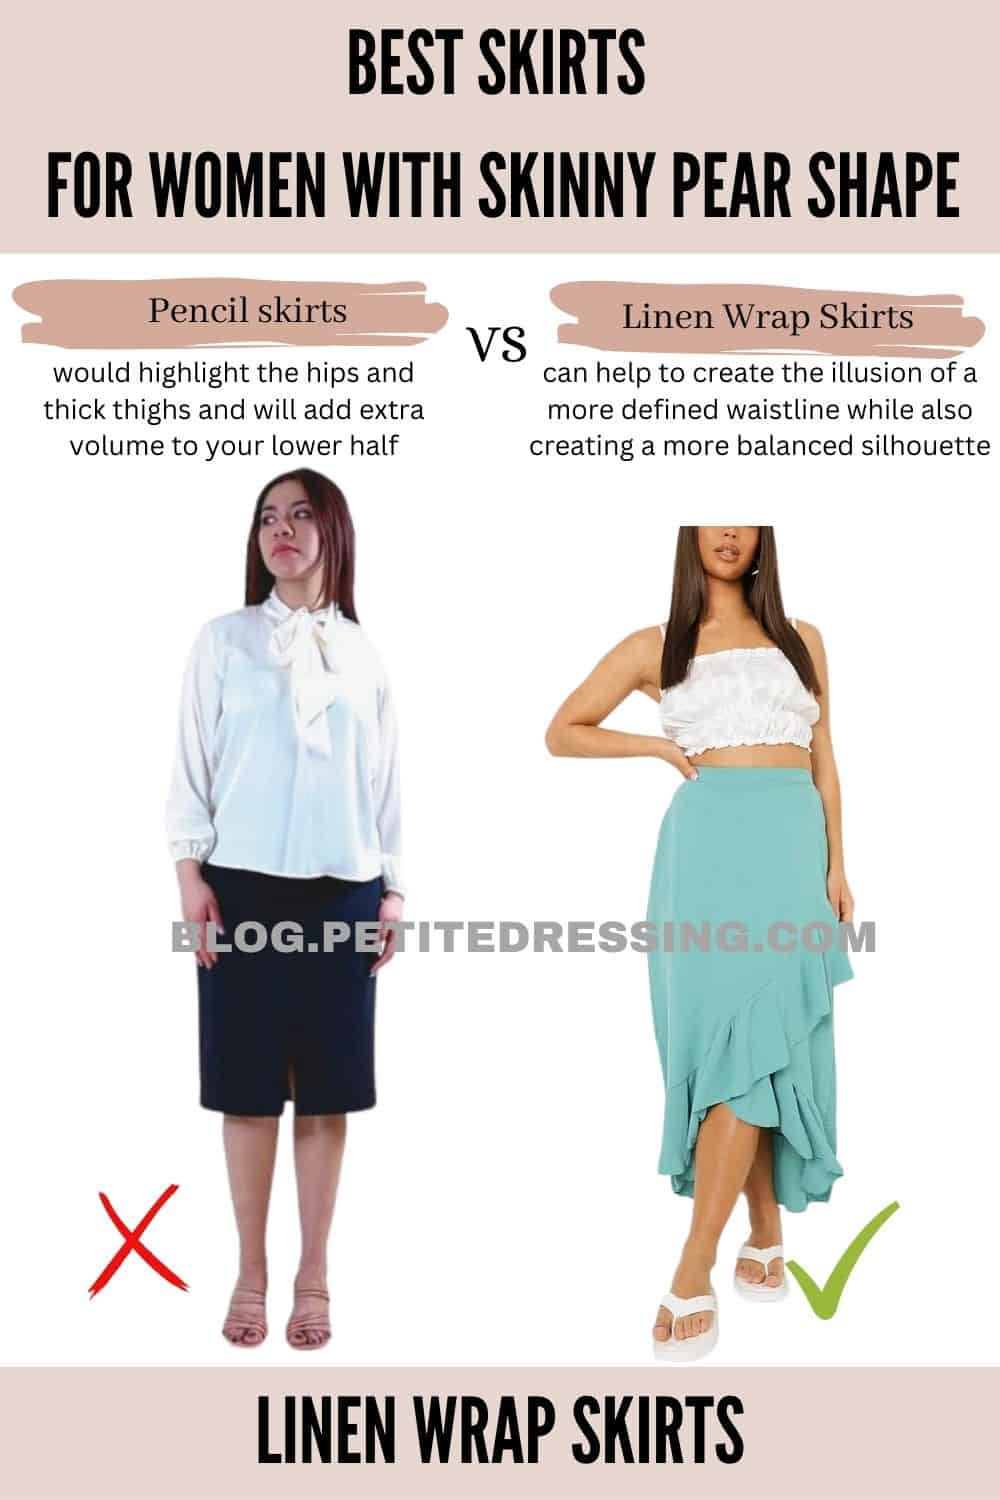 The Skirt Guide for Women with Skinny Pear Shape